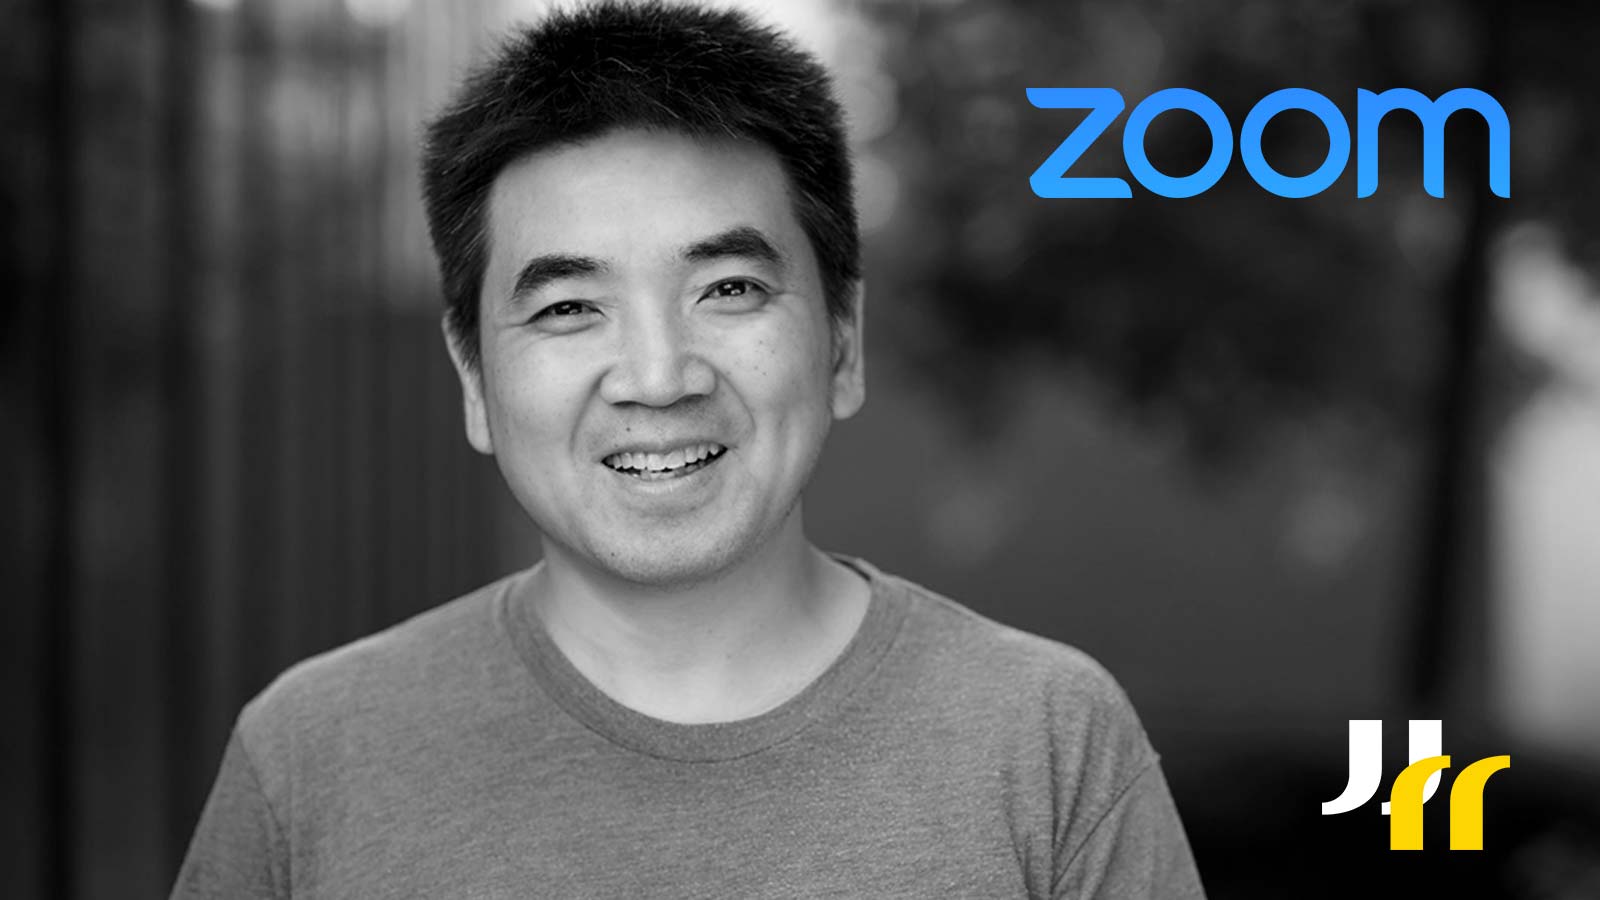 event header image - Zoom CEO Eric Yuan